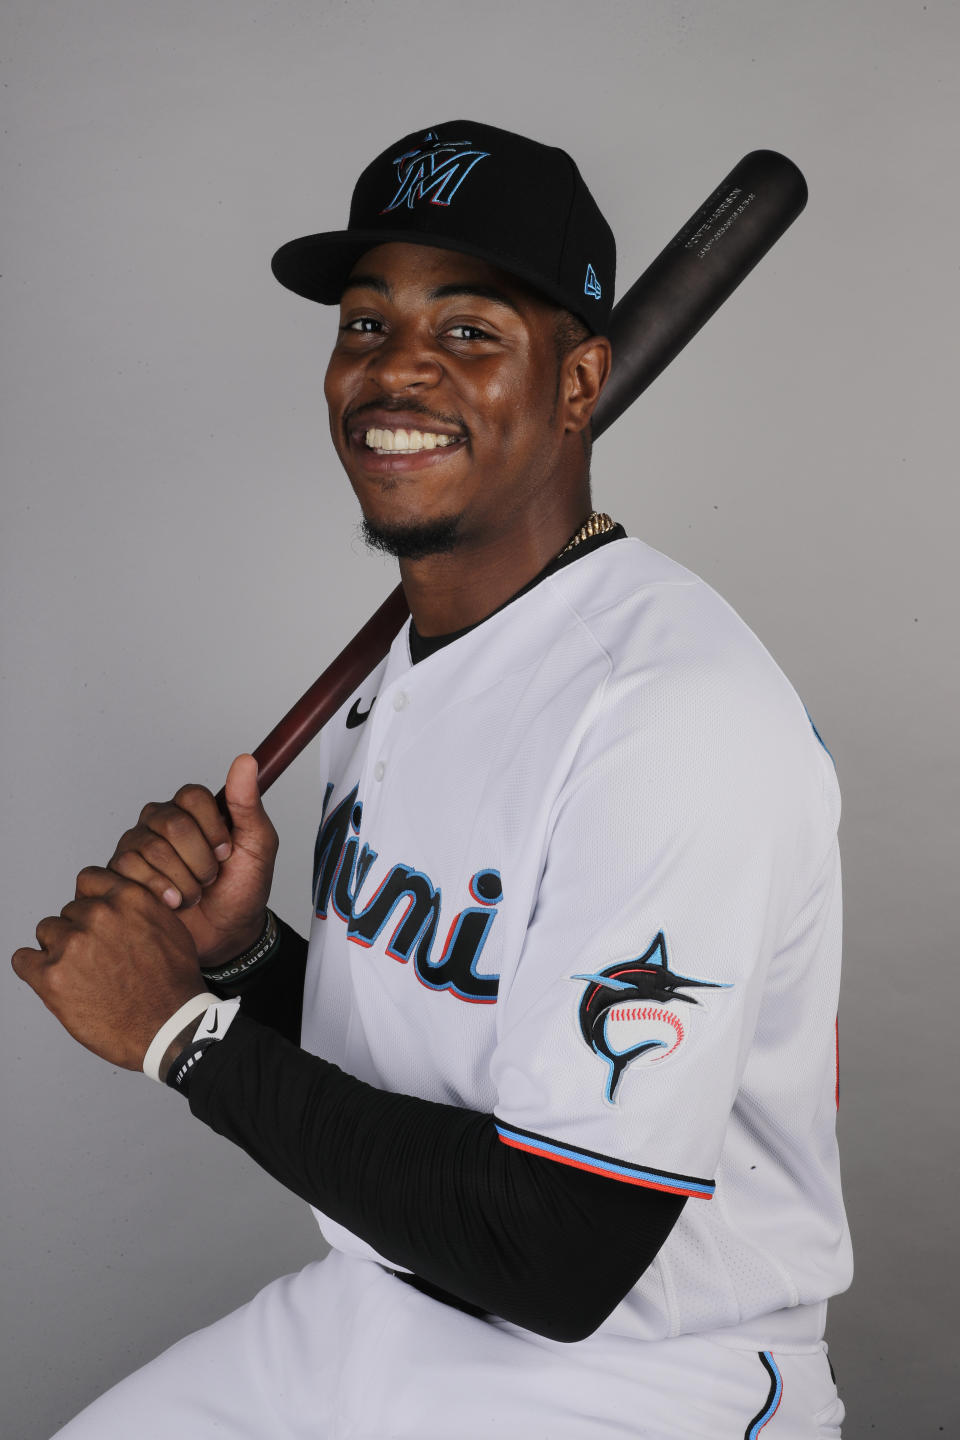 FILE - This is a 2020 file photo showing Monte Harrison of the Miami Marlins baseball team. (AP Photo/Brynn Anderson, File)